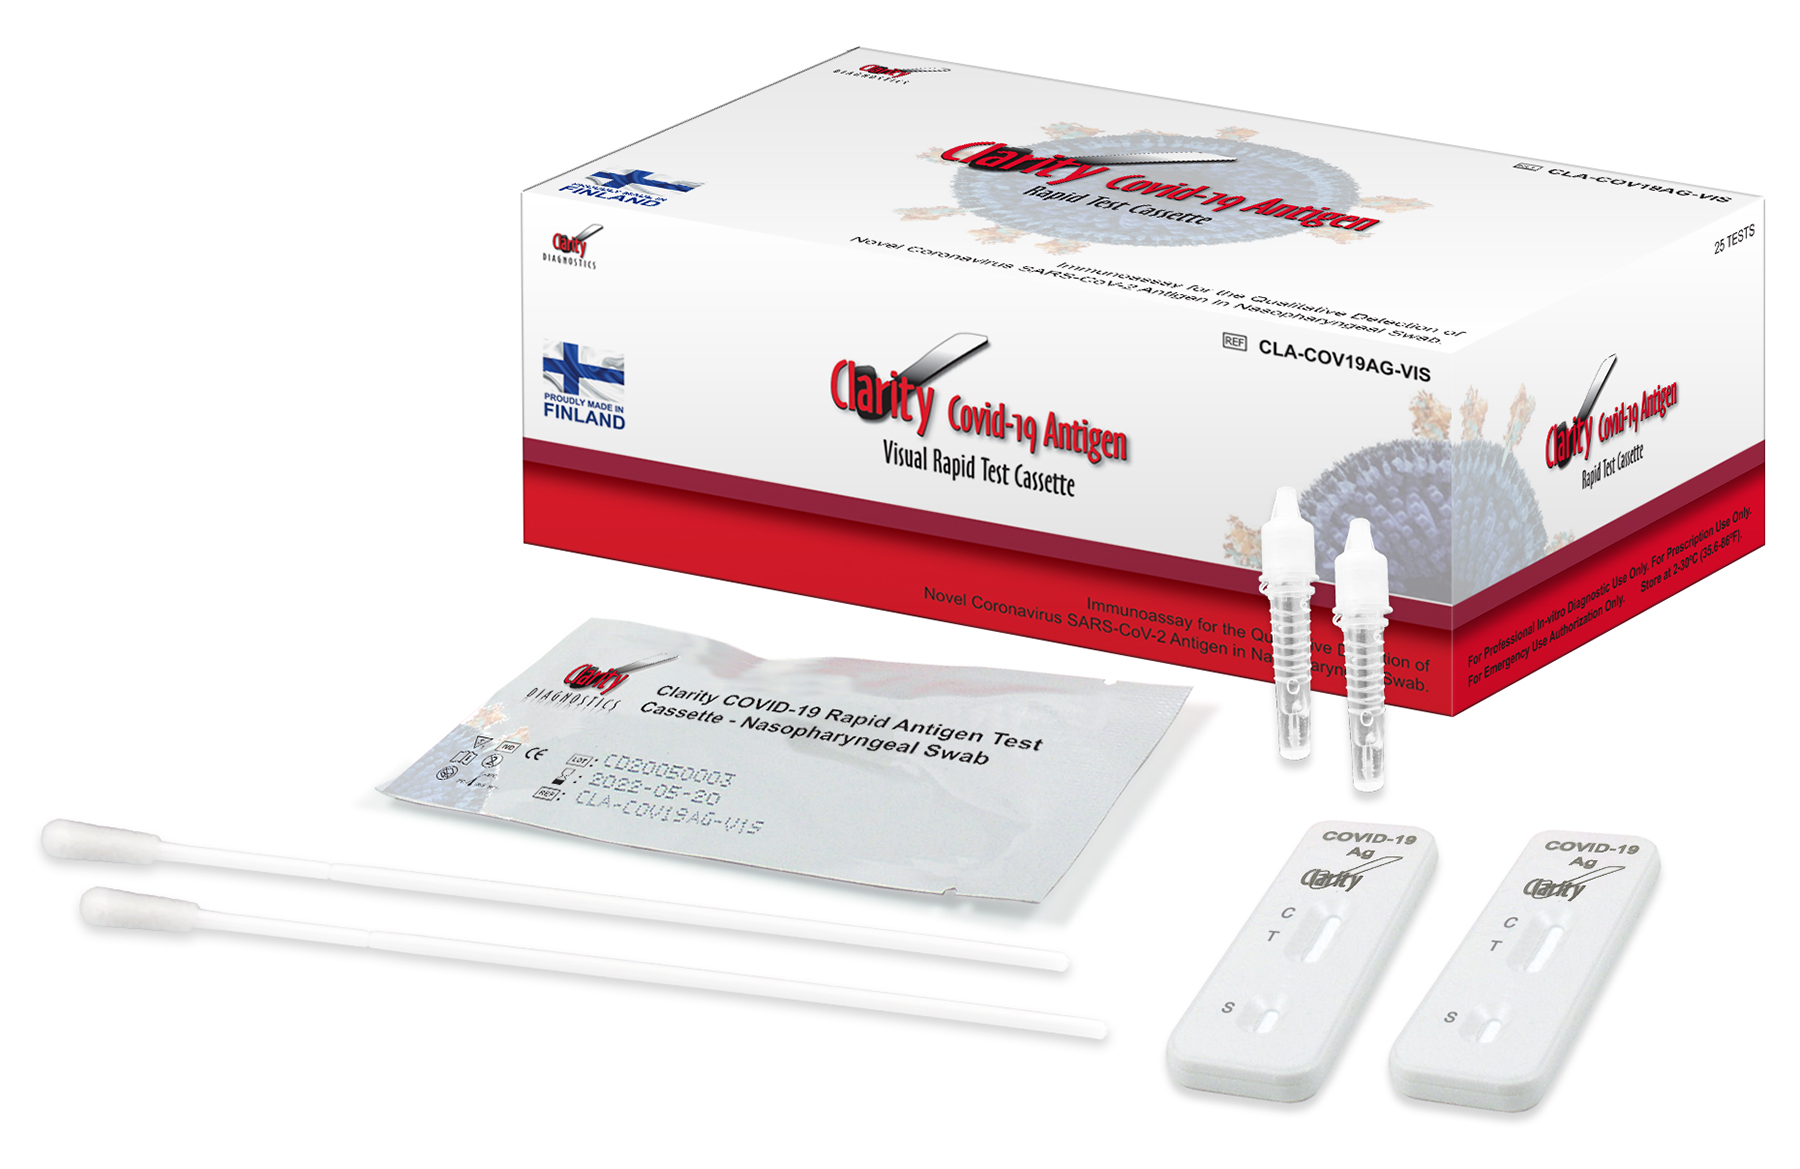 Covid 19 - PPE and Urinalysis test kits